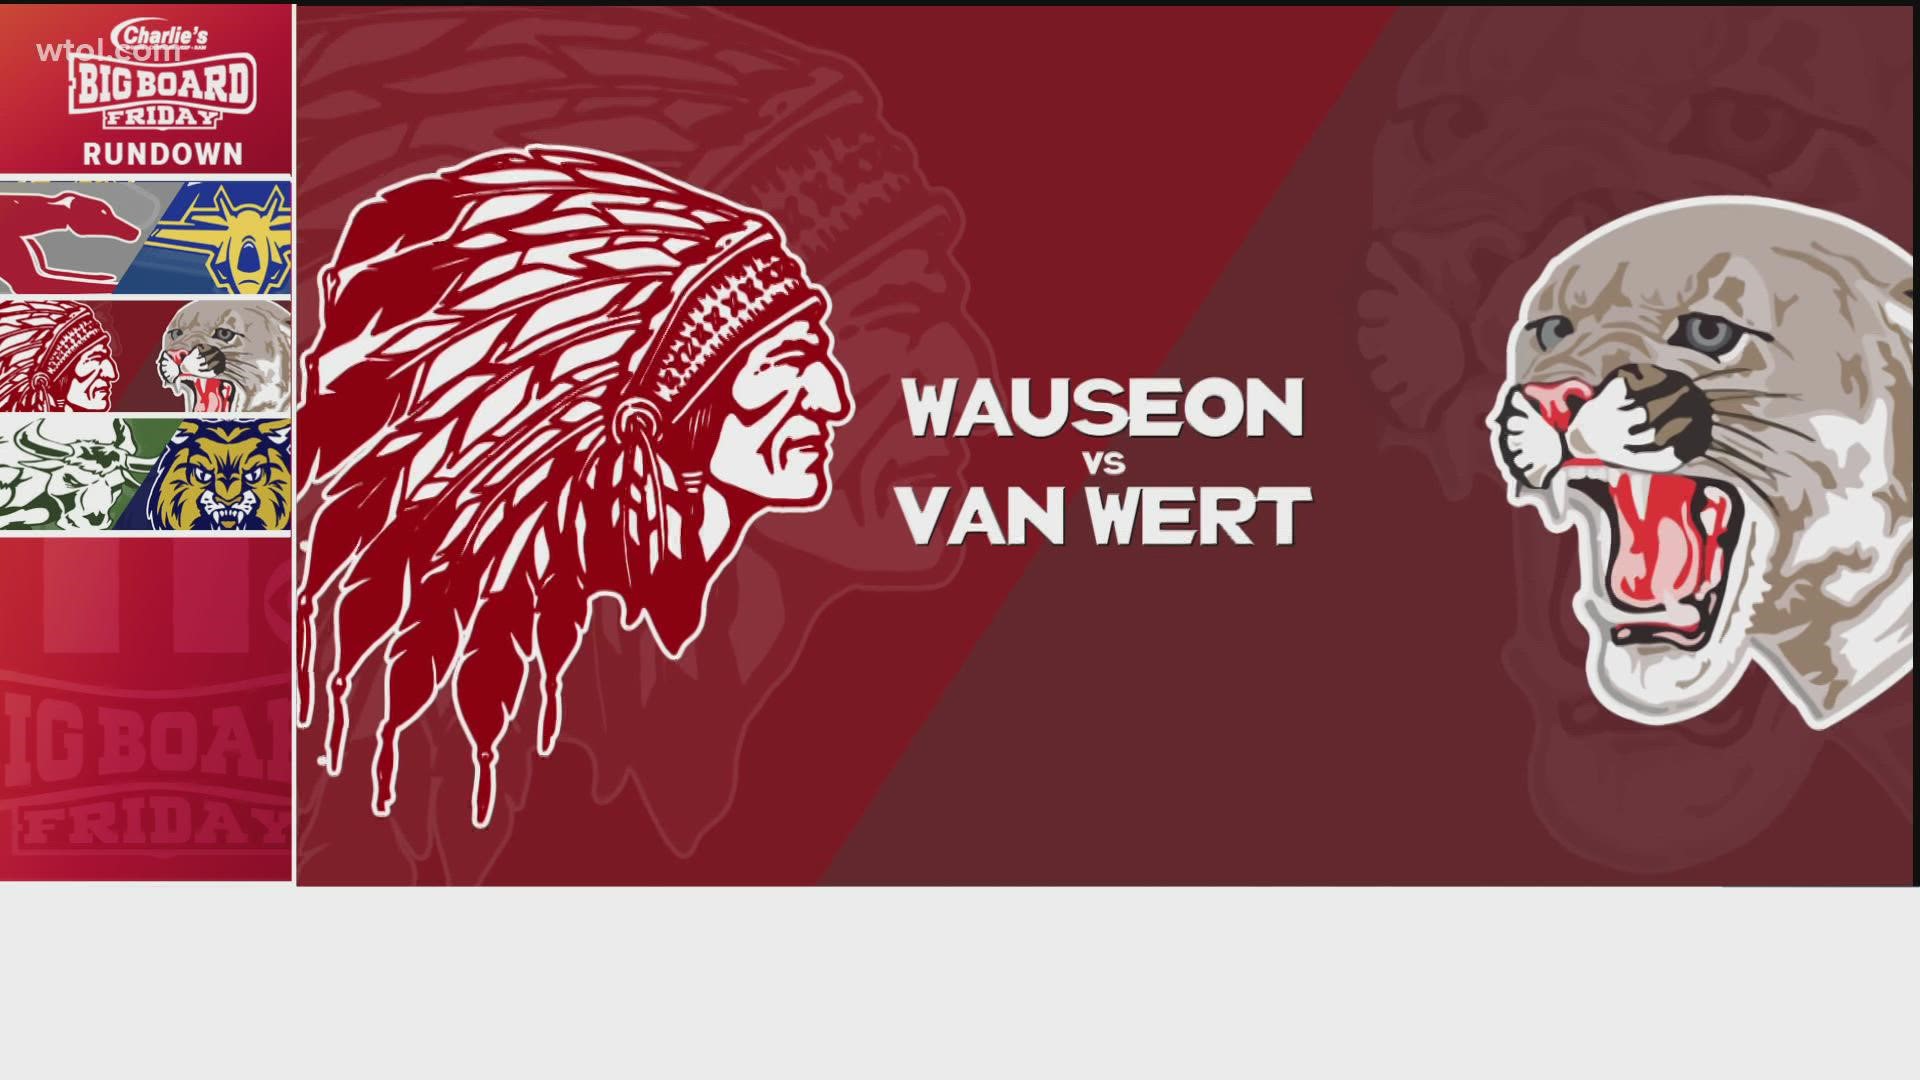 Sticking in Division IV. Wauseon still alive but a tough test tonight against the defending state champs Van Wert.